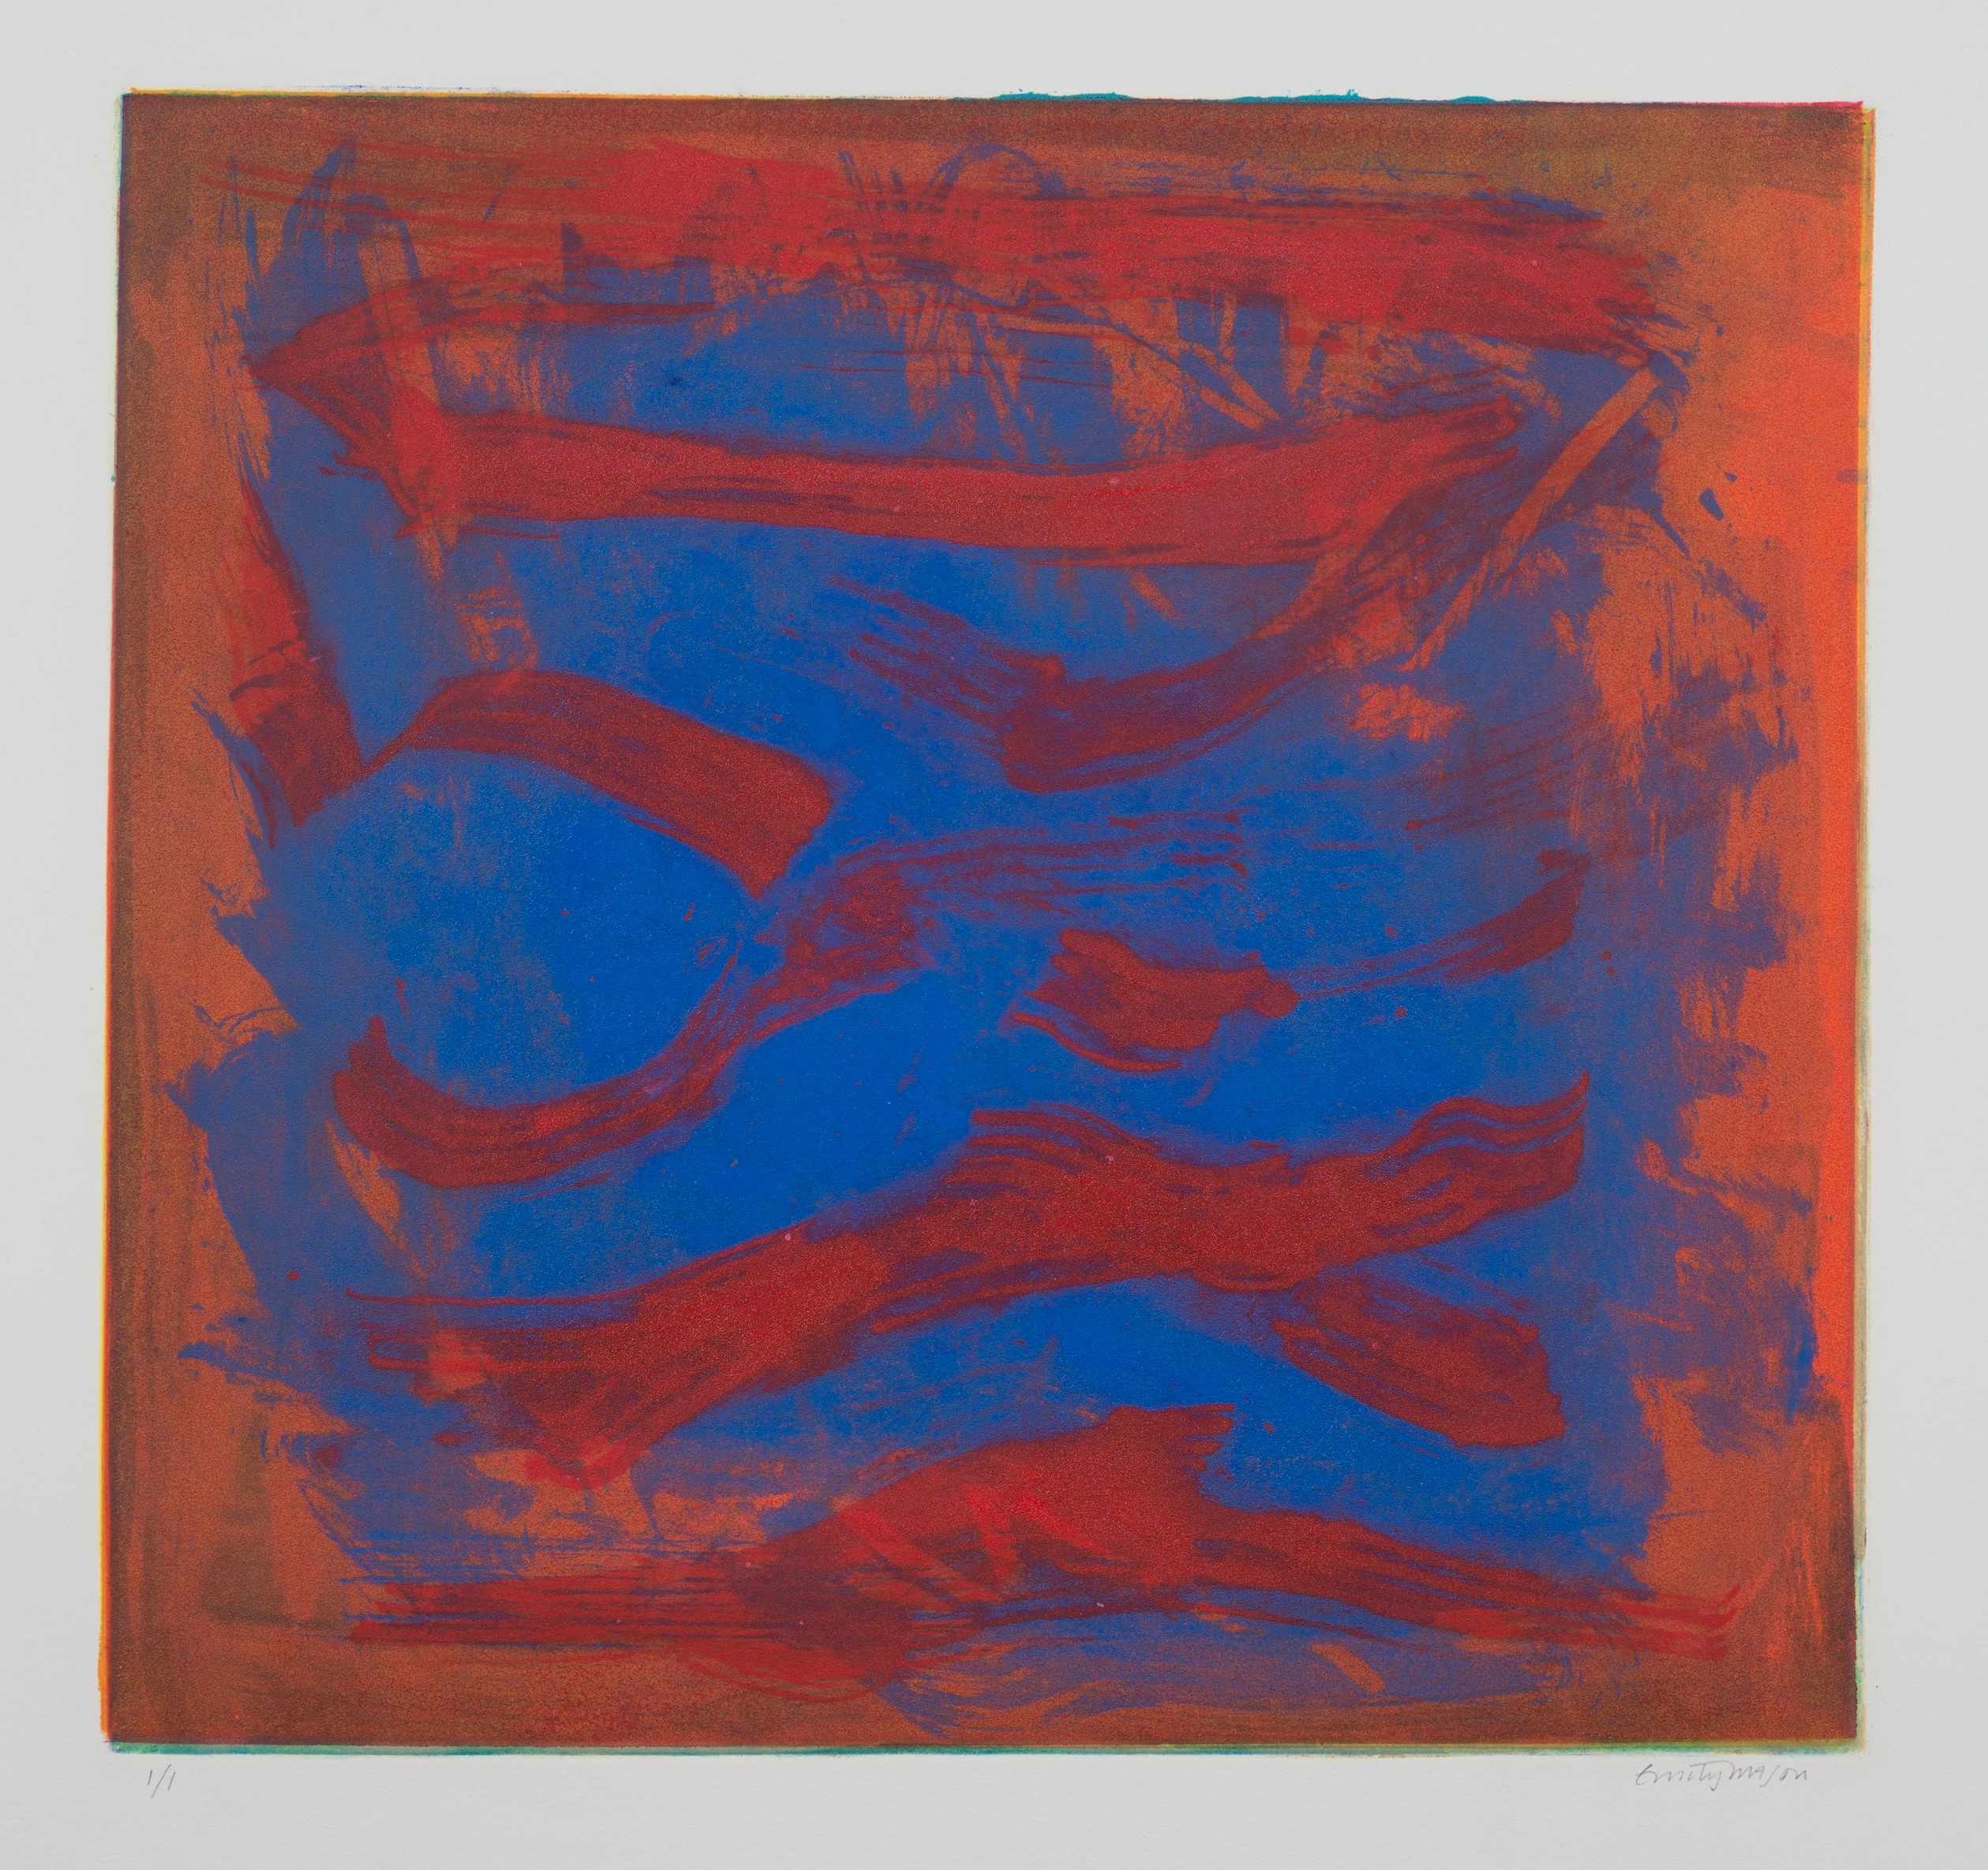 Monoprint on paper with blue horizontal gestures on top of an orange and red background.